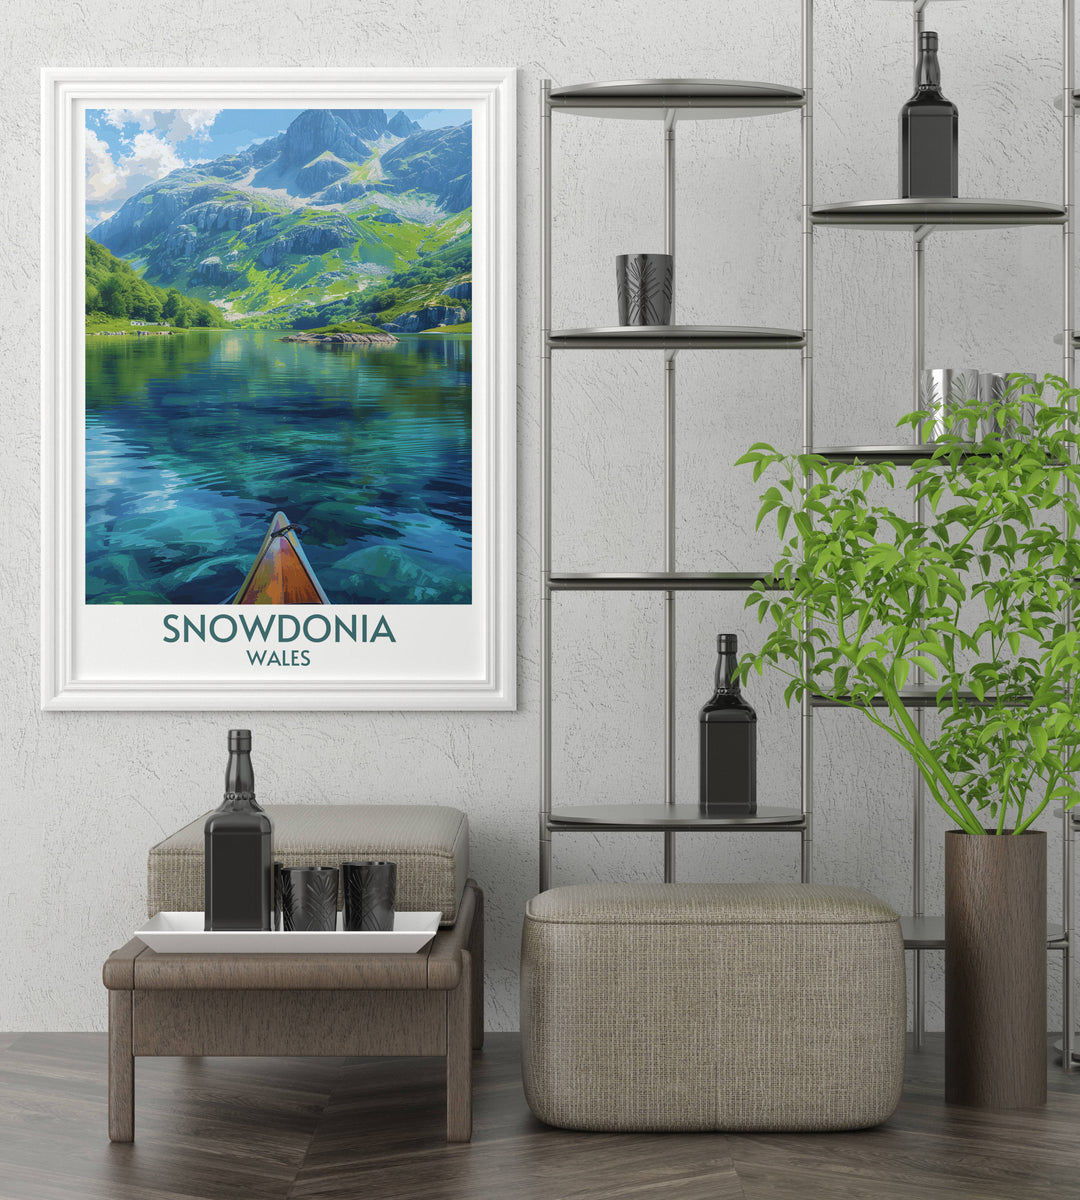 Snowdonia Framed Art collection highlights the serene beauty of Llyn Padarn, perfect for those who appreciate the calming effect of natural landscapes. Bring the peaceful atmosphere of Snowdonia into your home with this stunning print.